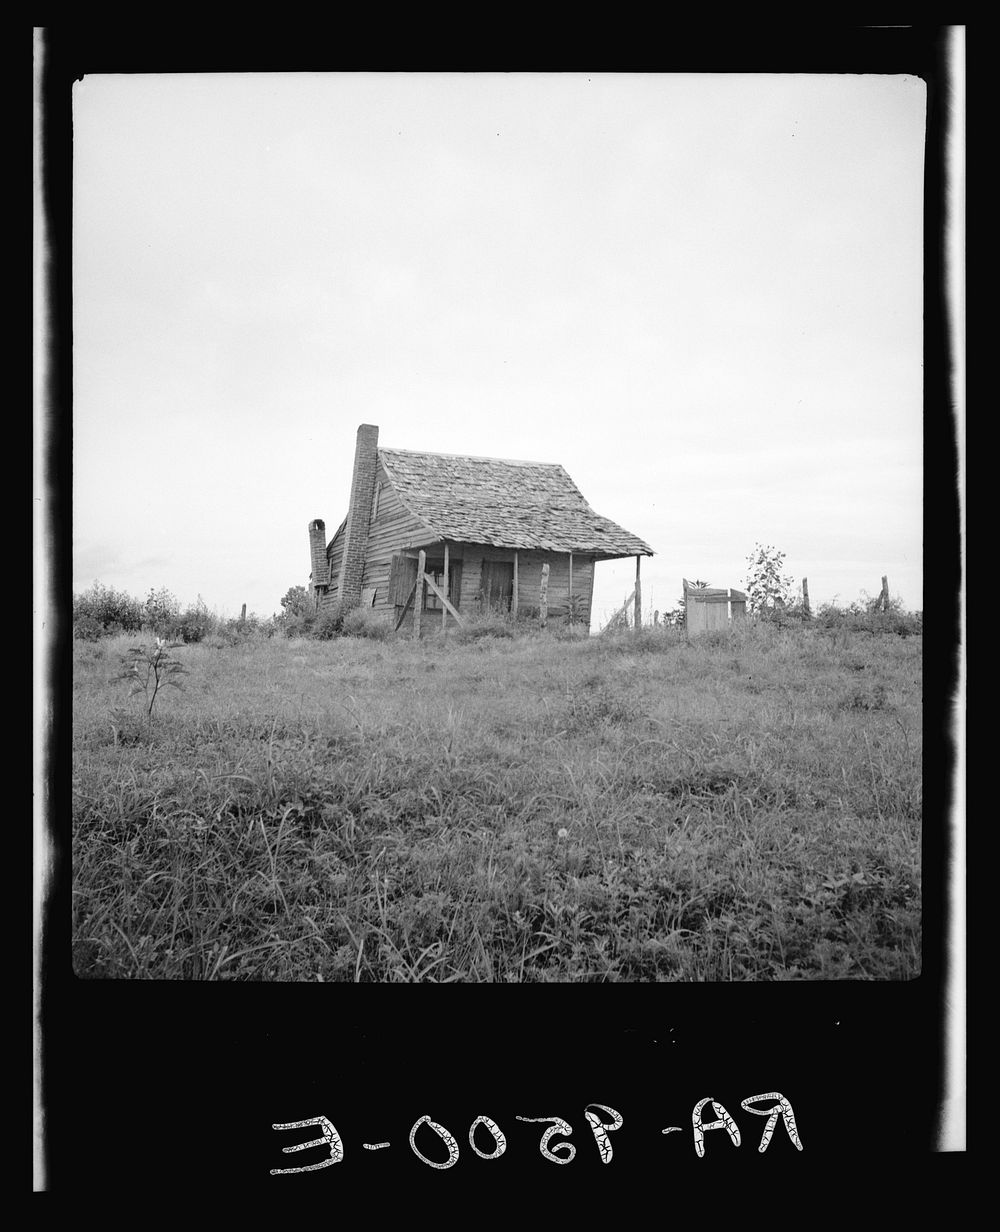 Many cabins of this type are found on the Mississippi Delta. Sourced from the Library of Congress.